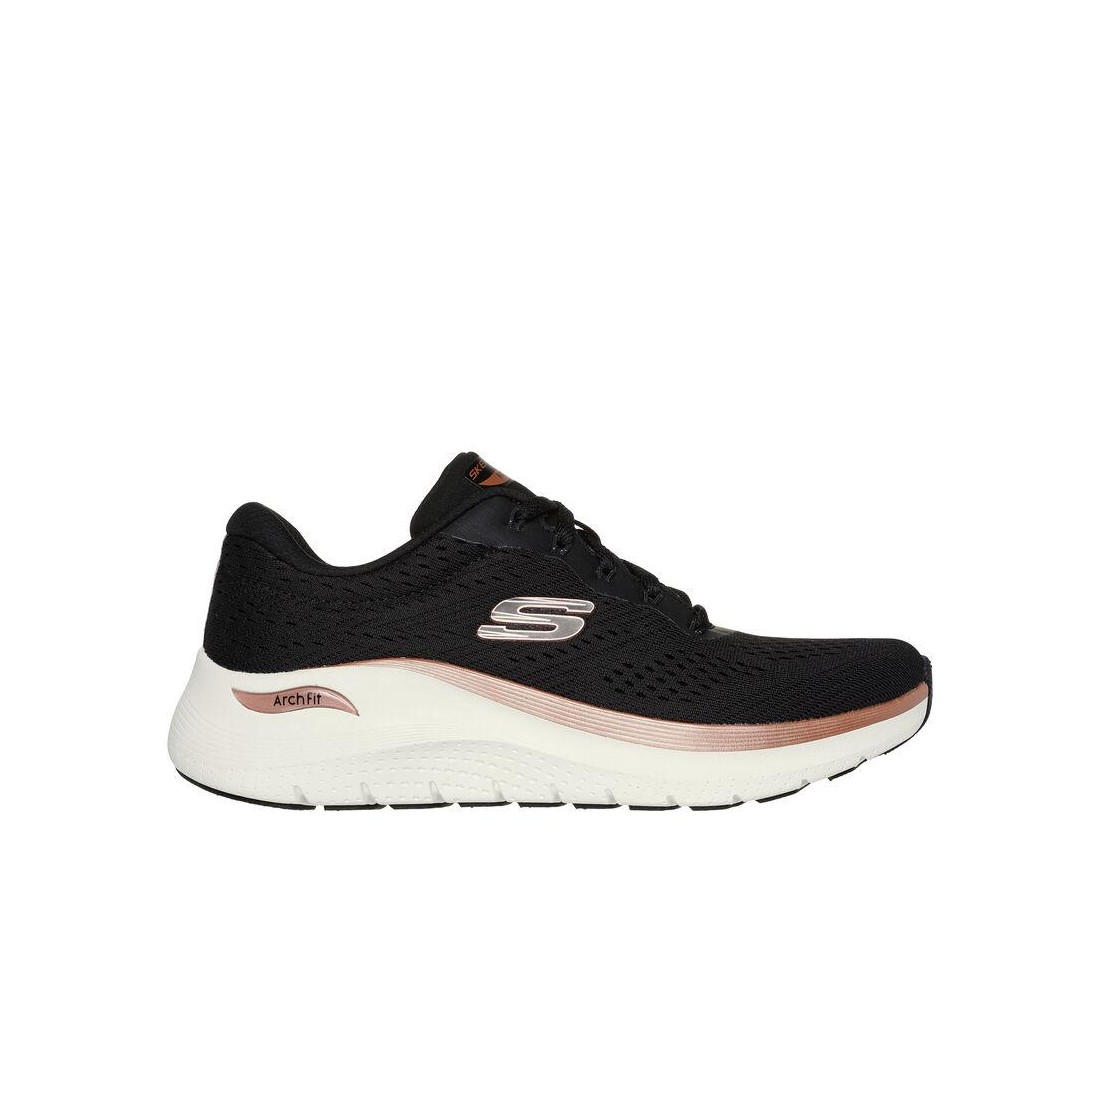 Giày Skechers Arch Fit 2.0 - Glow The Distance Nữ Đen